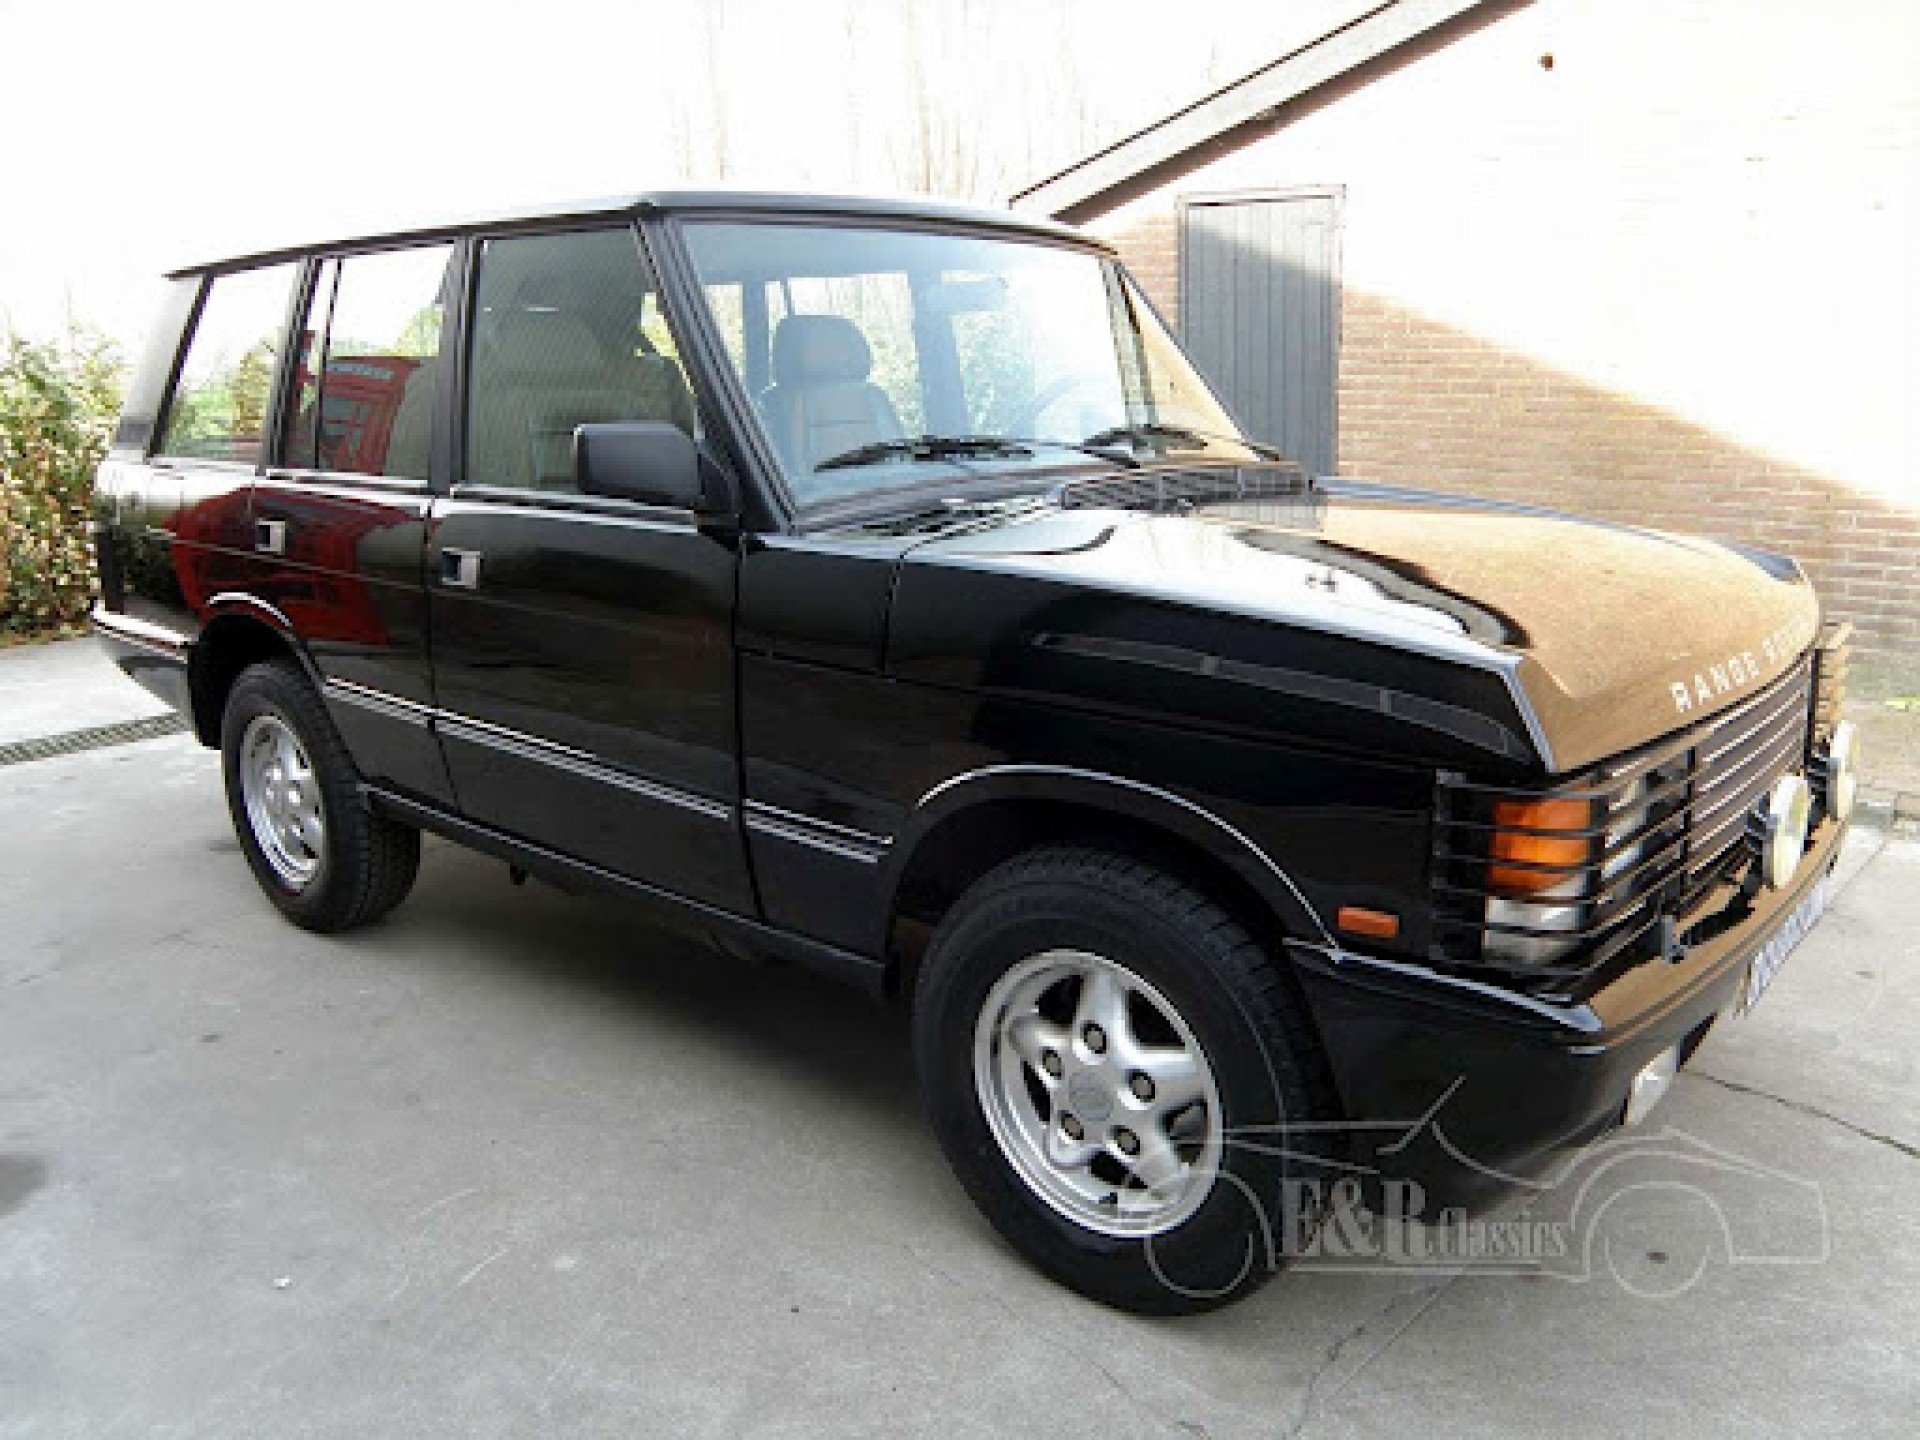 Land Rover Classic Cars | Land Rover oldtimers for sale at E & R Classic  Cars!